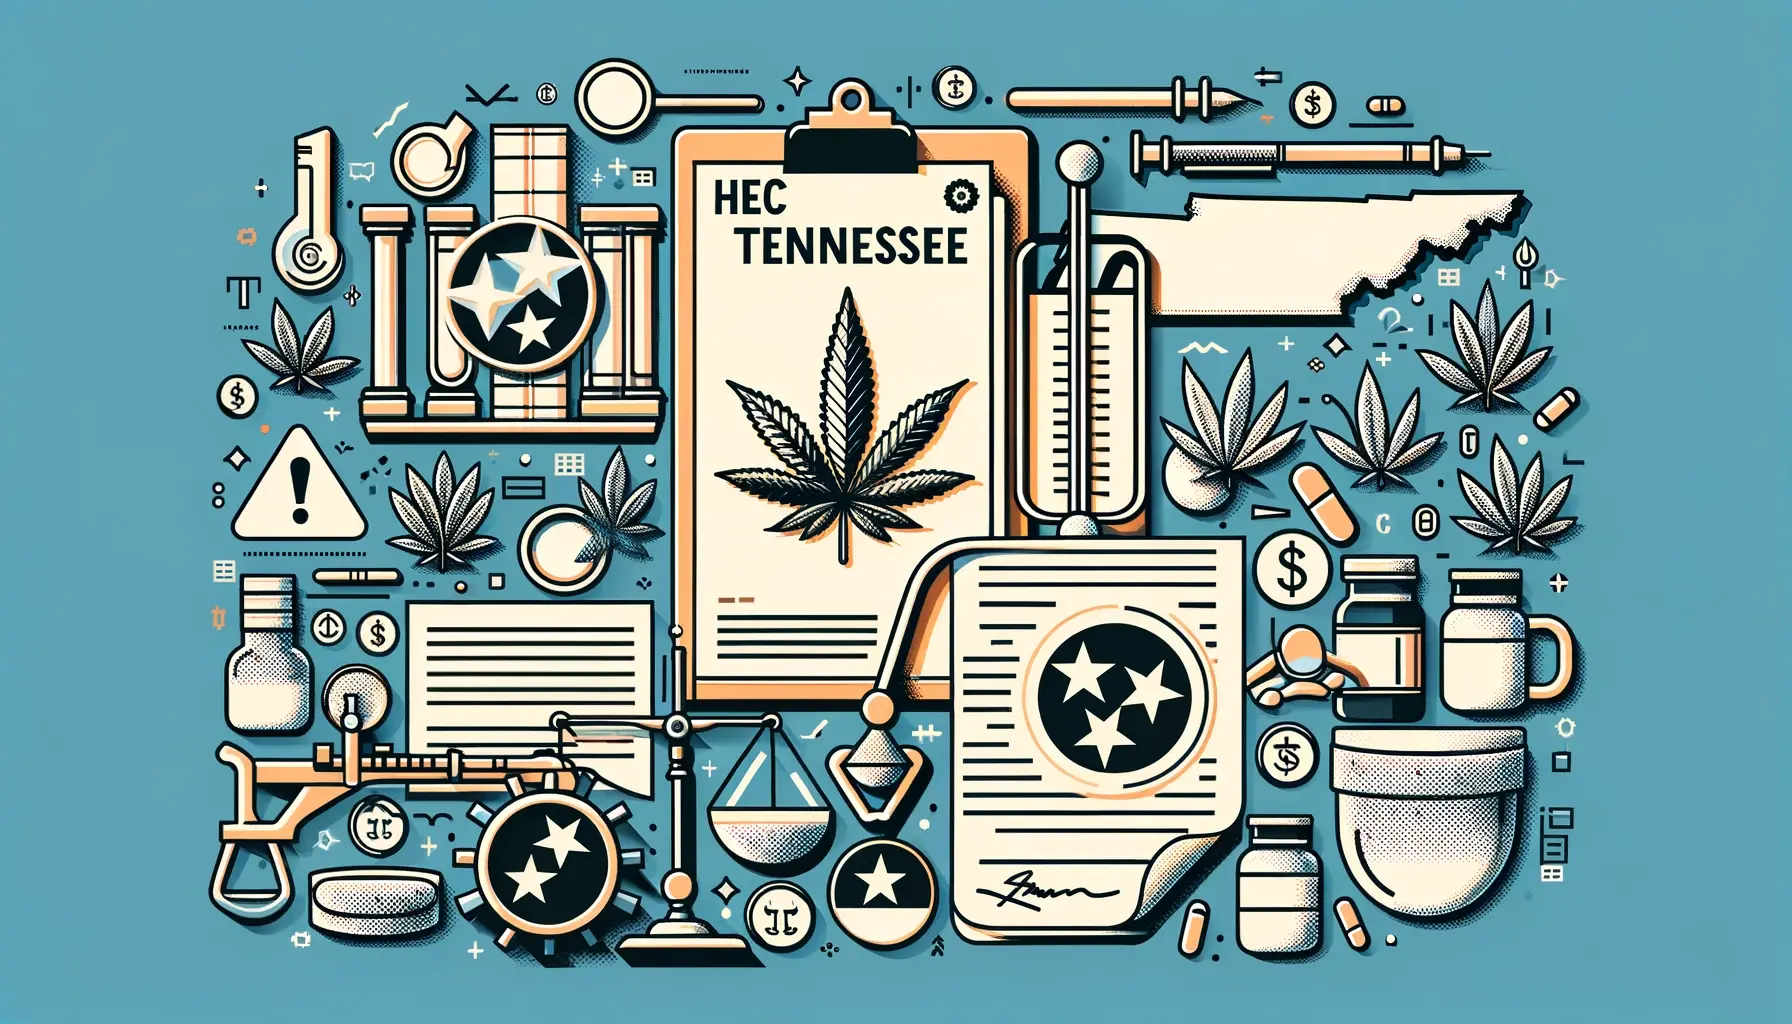 A visually appealing and modern image representing the concept of Delta 8 THC legality in Tennessee. The image should include symbols or elements related to hemp, legal documents, and the state of Tennessee, such as a map outline or state flag. The style should be informative and engaging, suitable for a feature image on a blog discussing legal aspects of Delta 8 THC.